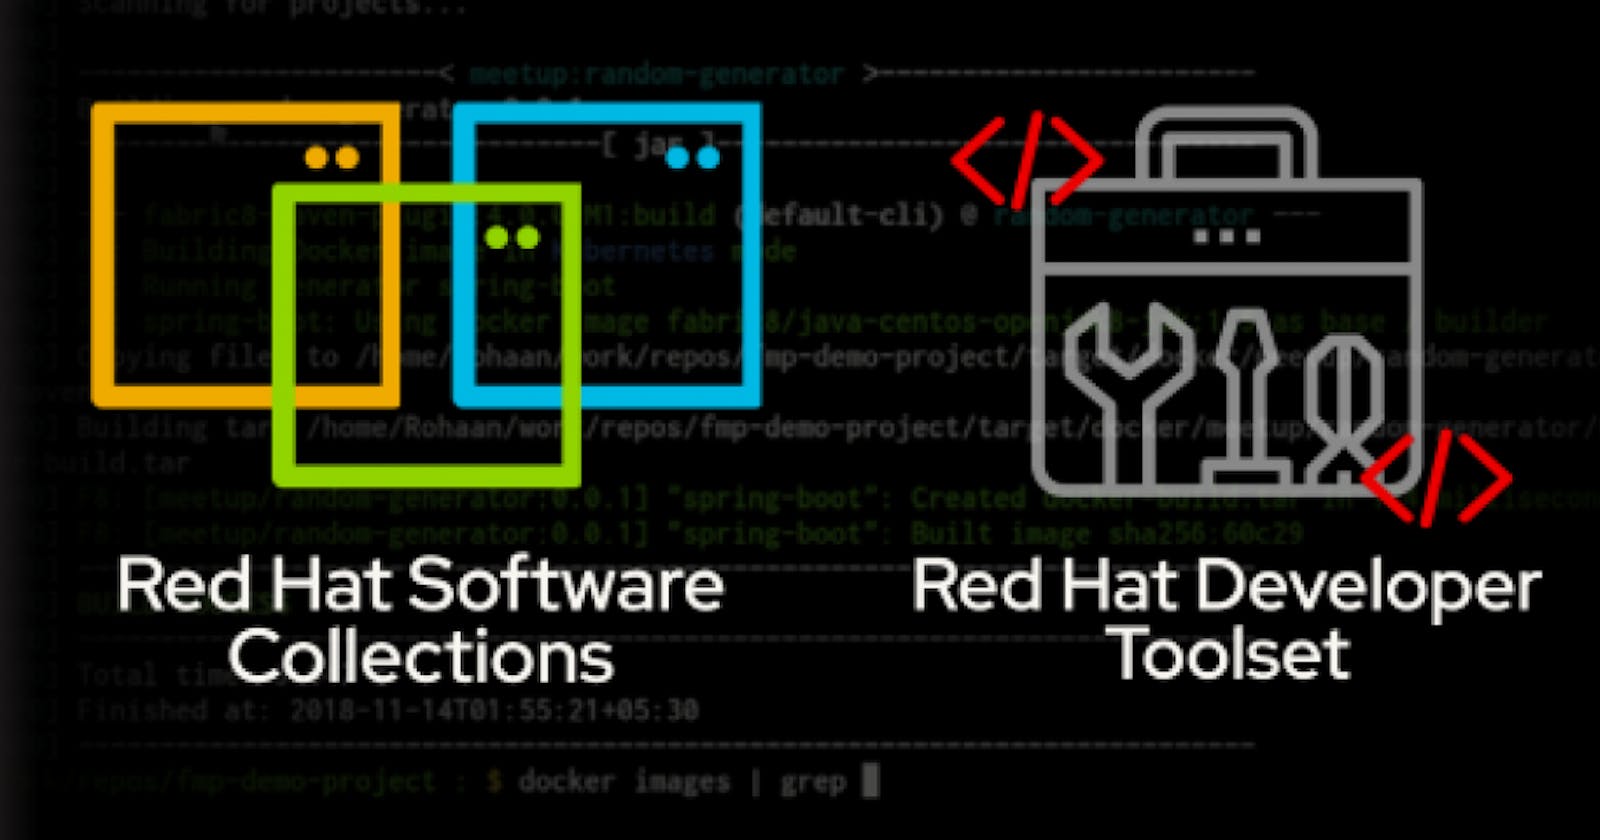 Exploring the Power and Potential of Demo.RedHat.com: A Playground for Innovation